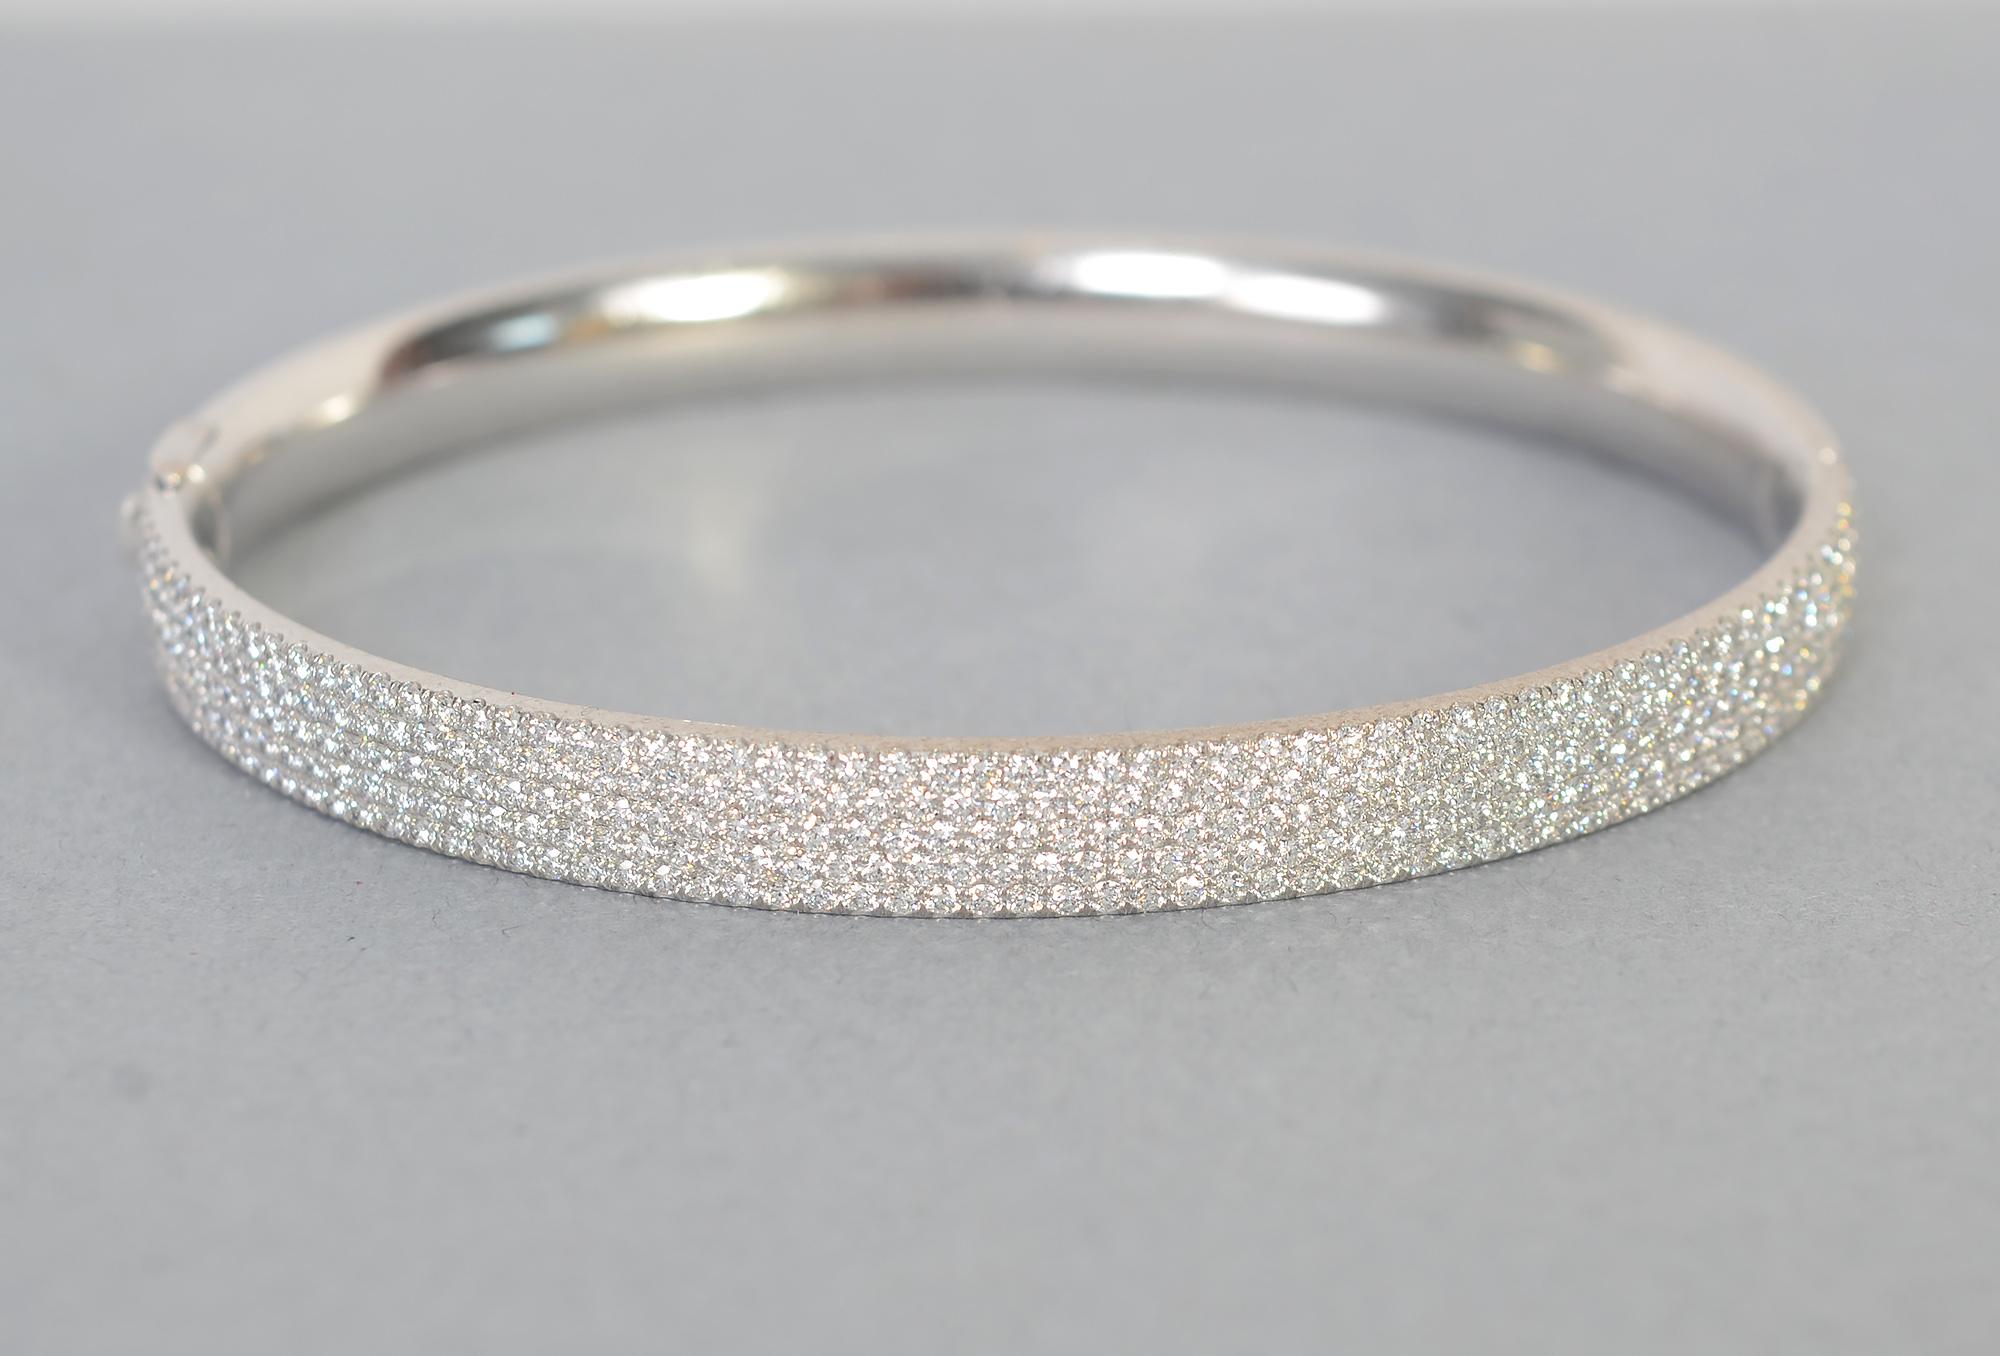 Tiffany Metro hinged bangle bracelet with five rows of round brilliant diamonds weighing just under 2 carats. The bracelet is 18 karat white gold. 
It is 2 1/2 inches in diameter and 1/4 inch in height. It is the medium size.
The bracelet is